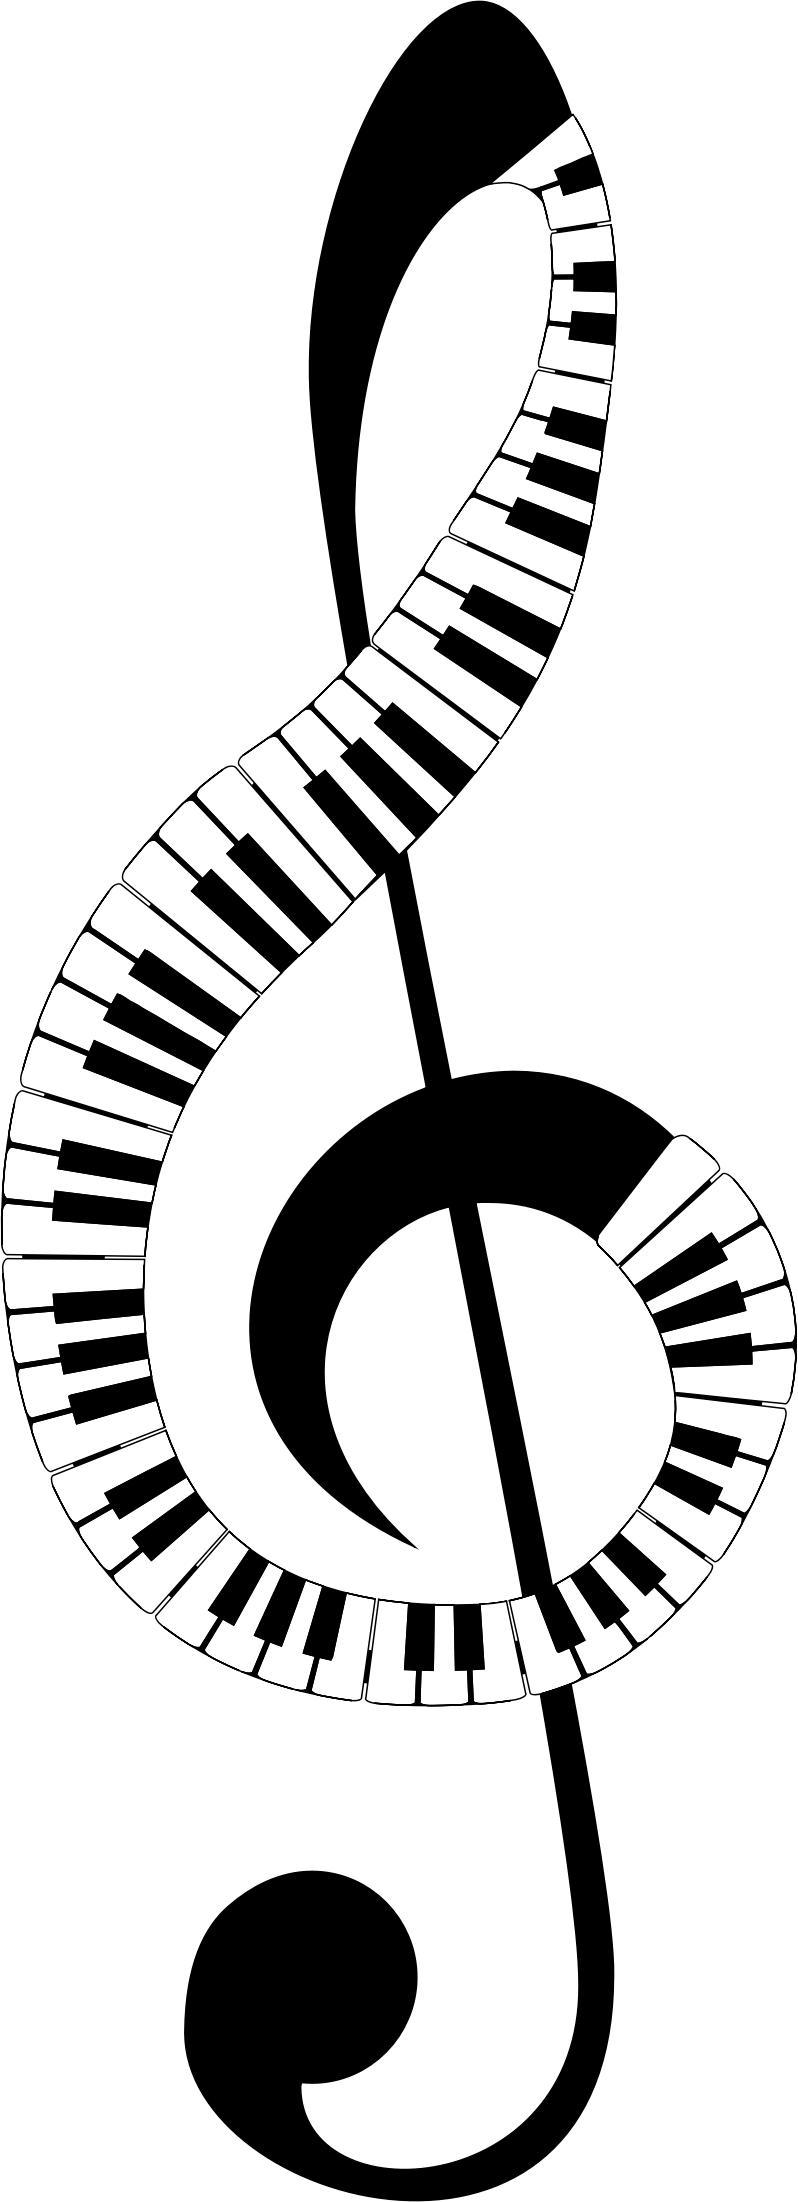 Clef Keyboard Recreation With Stroke png transparent